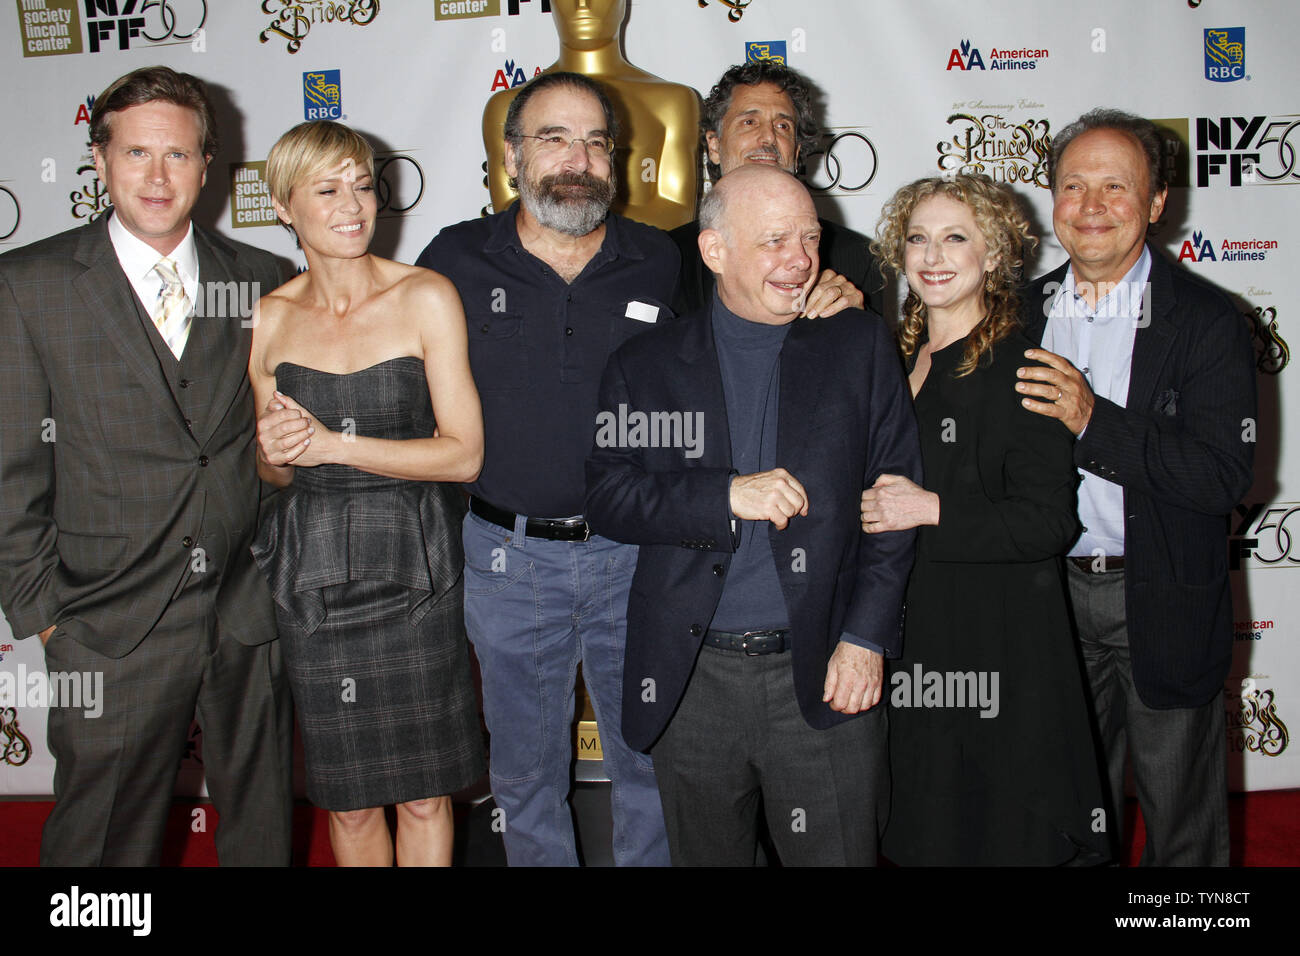 The cast (L-R) Cary Elwes, Robin Wright, Mandy Patinkin, Wallace Shawn, Chris Sarandon, Carol Kane and Billy Crystal attend the 25th Anniversary screening of 'The Princess Bride' at the 2012 New York Film Festival at Alice Tully Hall at Lincoln Center in New York on October 2, 2012.       UPI /Laura Cavanaugh Stock Photo